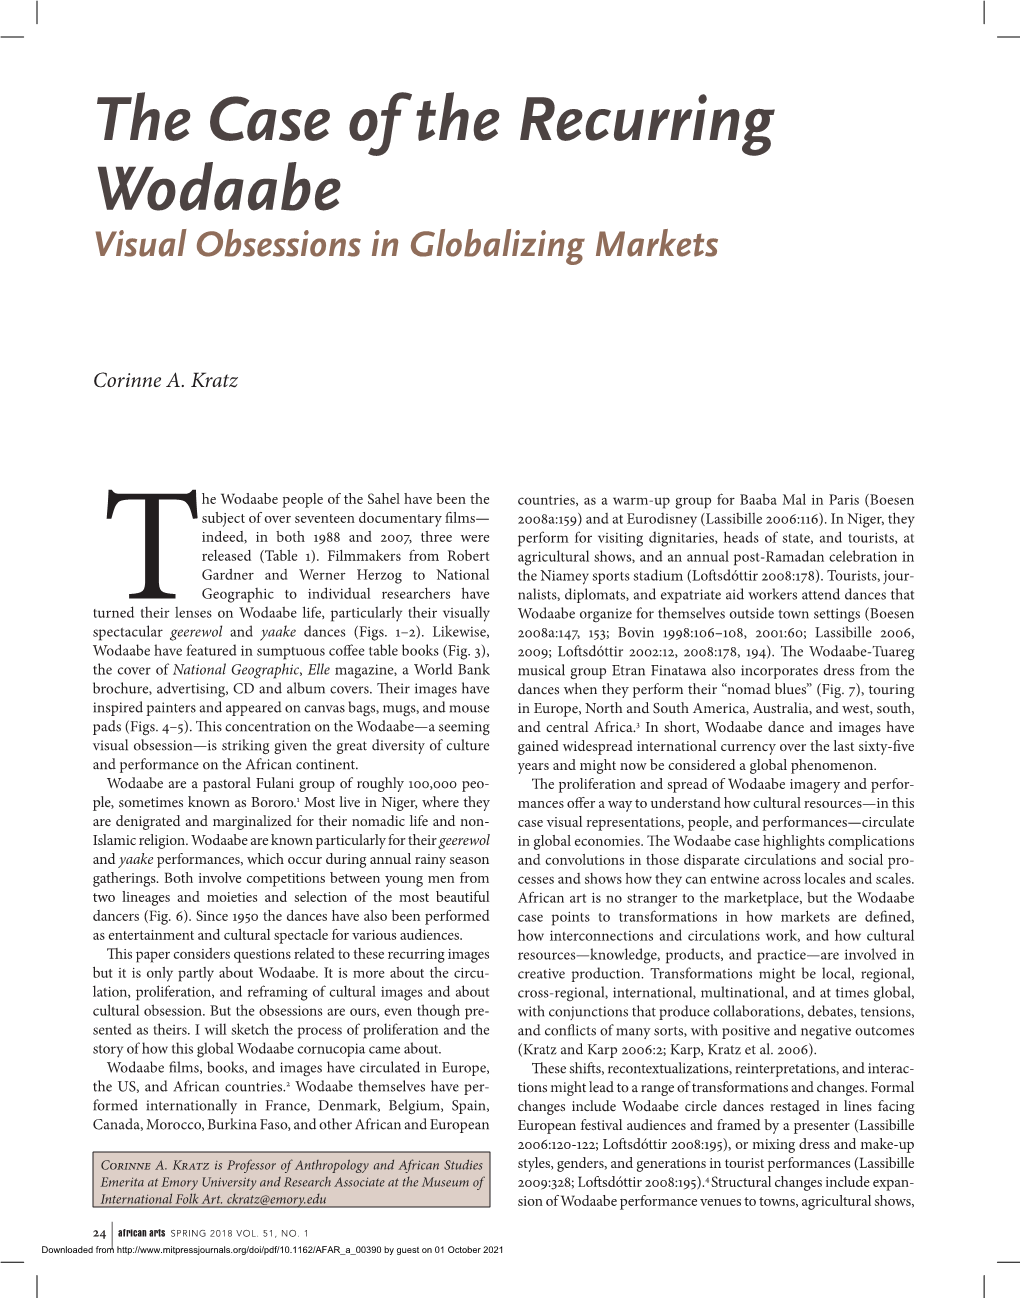 The Case of the Recurring Wodaabe Visual Obsessions in Globalizing Markets